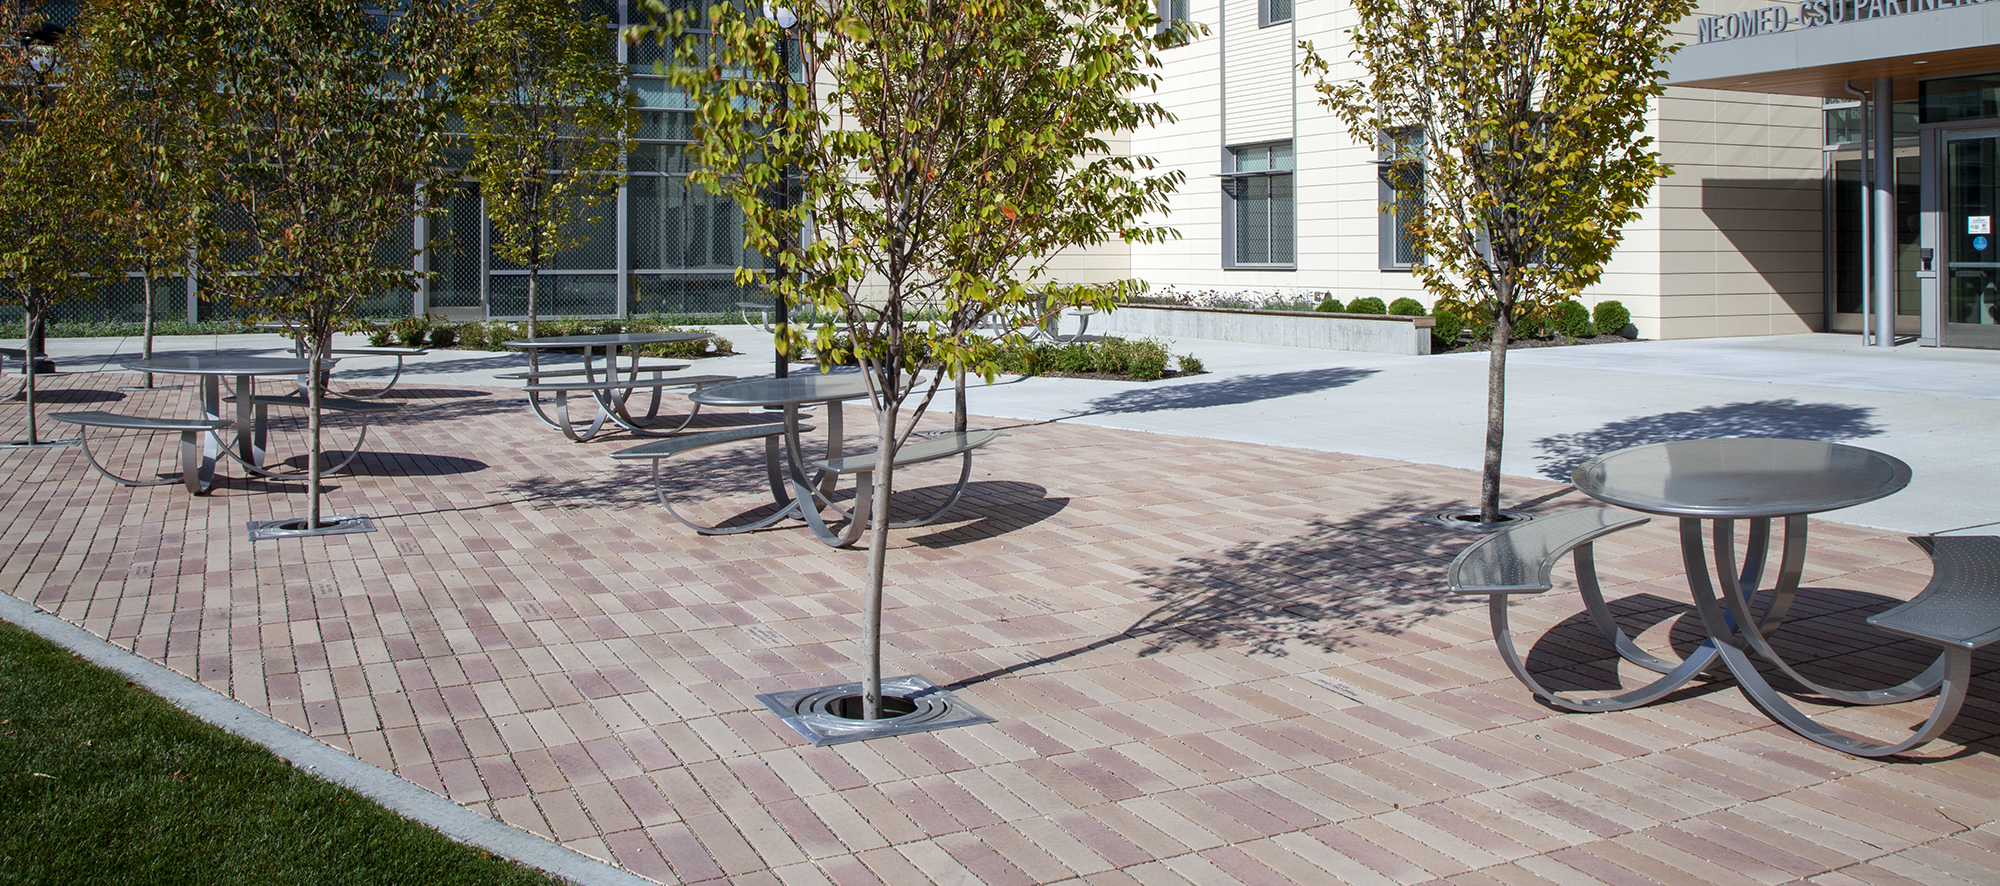 Promenade Plank pavers in a reddish-brown hue delineate an outdoor eating space, shaded by surrounding trees.